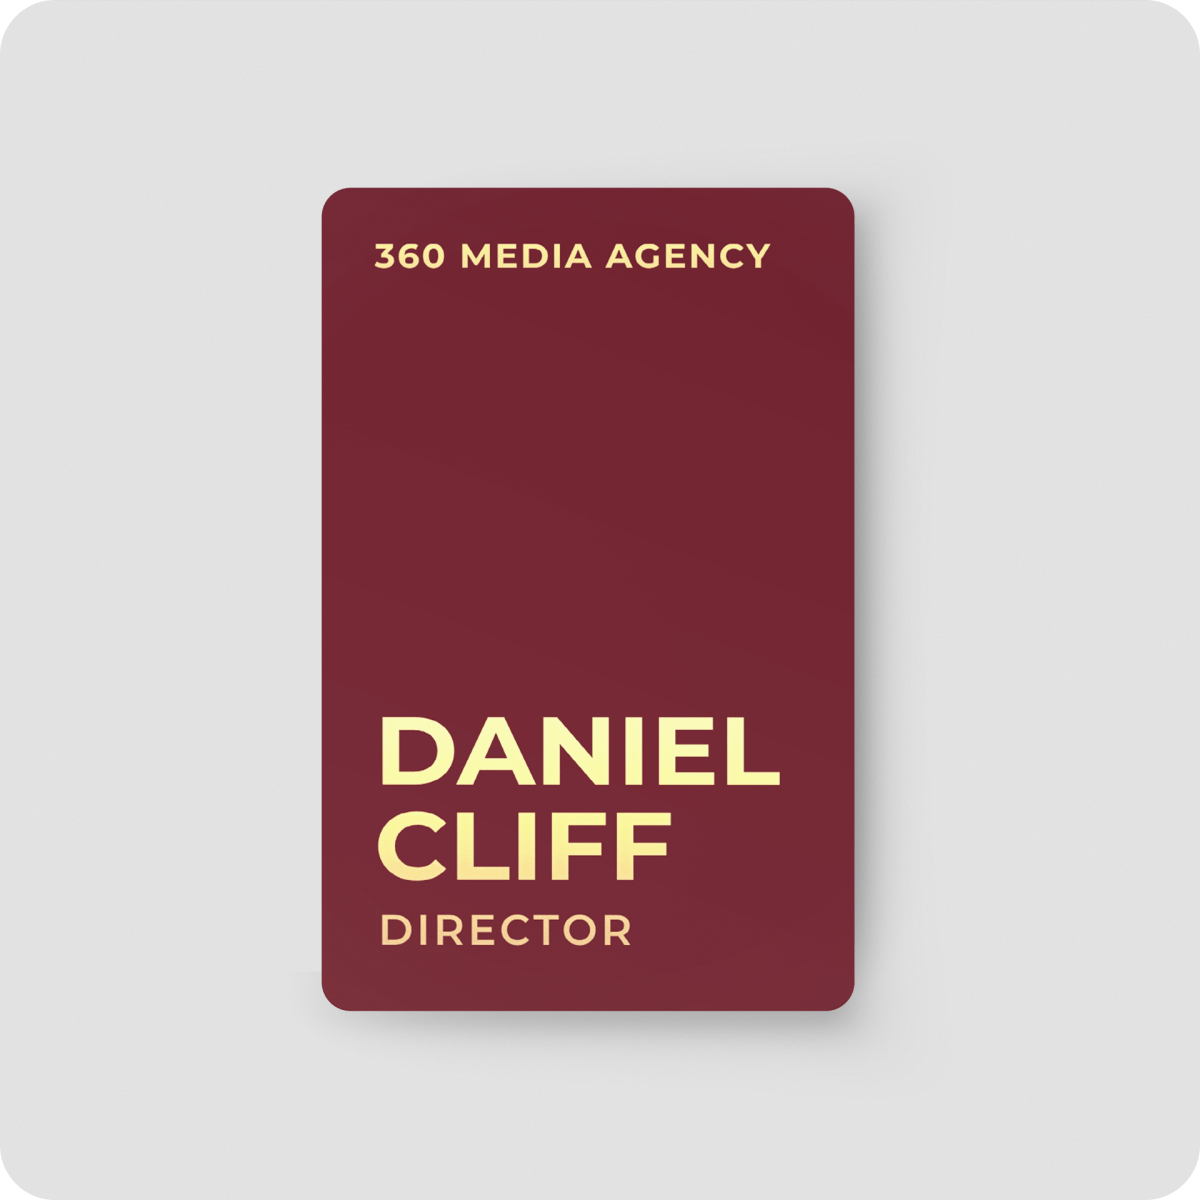 One Good Card | Smart Digital Name Card (Portrait) - Personalised Near Field Communication (NFC) Business Cards designs.